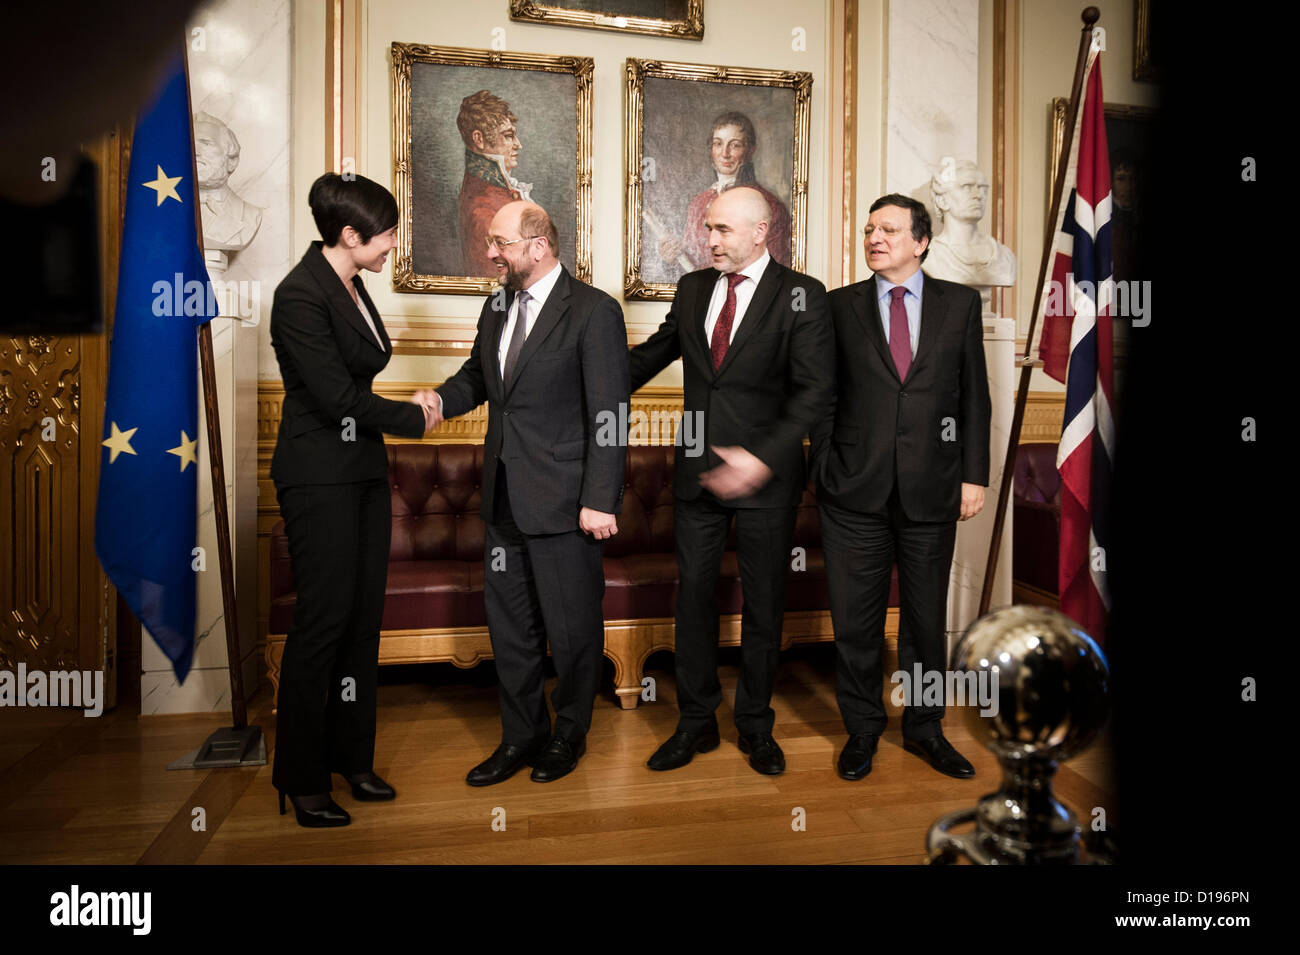 Oslo, Norway. 11/12/2012. Nobel Peace Prize winner Martin Schulz  and Jose Manuel Barrosa meets the press at the Norwegian Parliament along with president of the storting Dag Terje Andersen and Ine Marie Eriksen Soereide Credit:  Alexander Widding / Alamy Live News Stock Photo